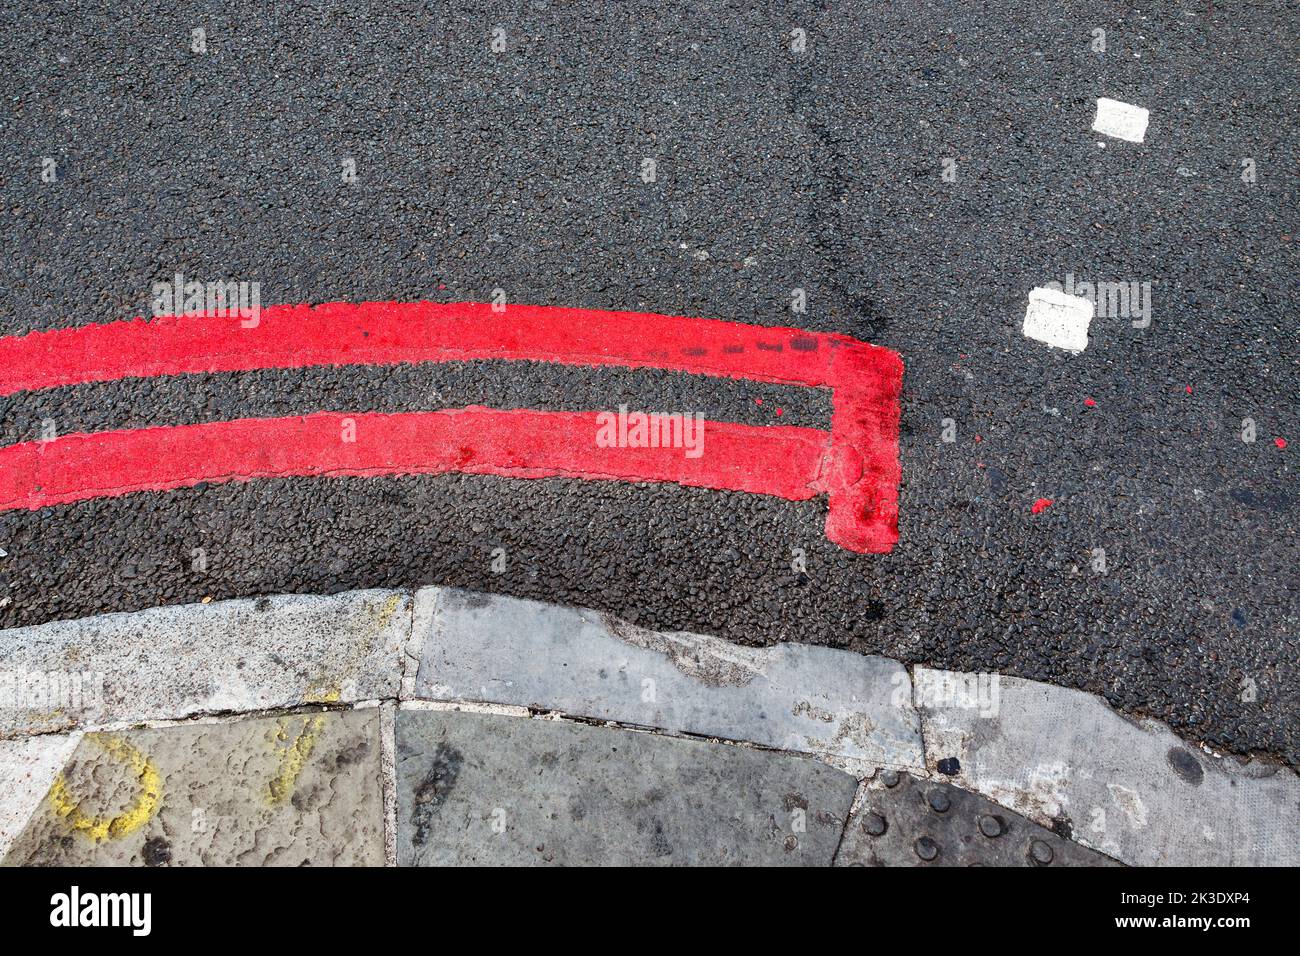 A double red line, signifying a TfL (Transport for London) no-stopping 'red route' in Camden Town, London, UK Stock Photo